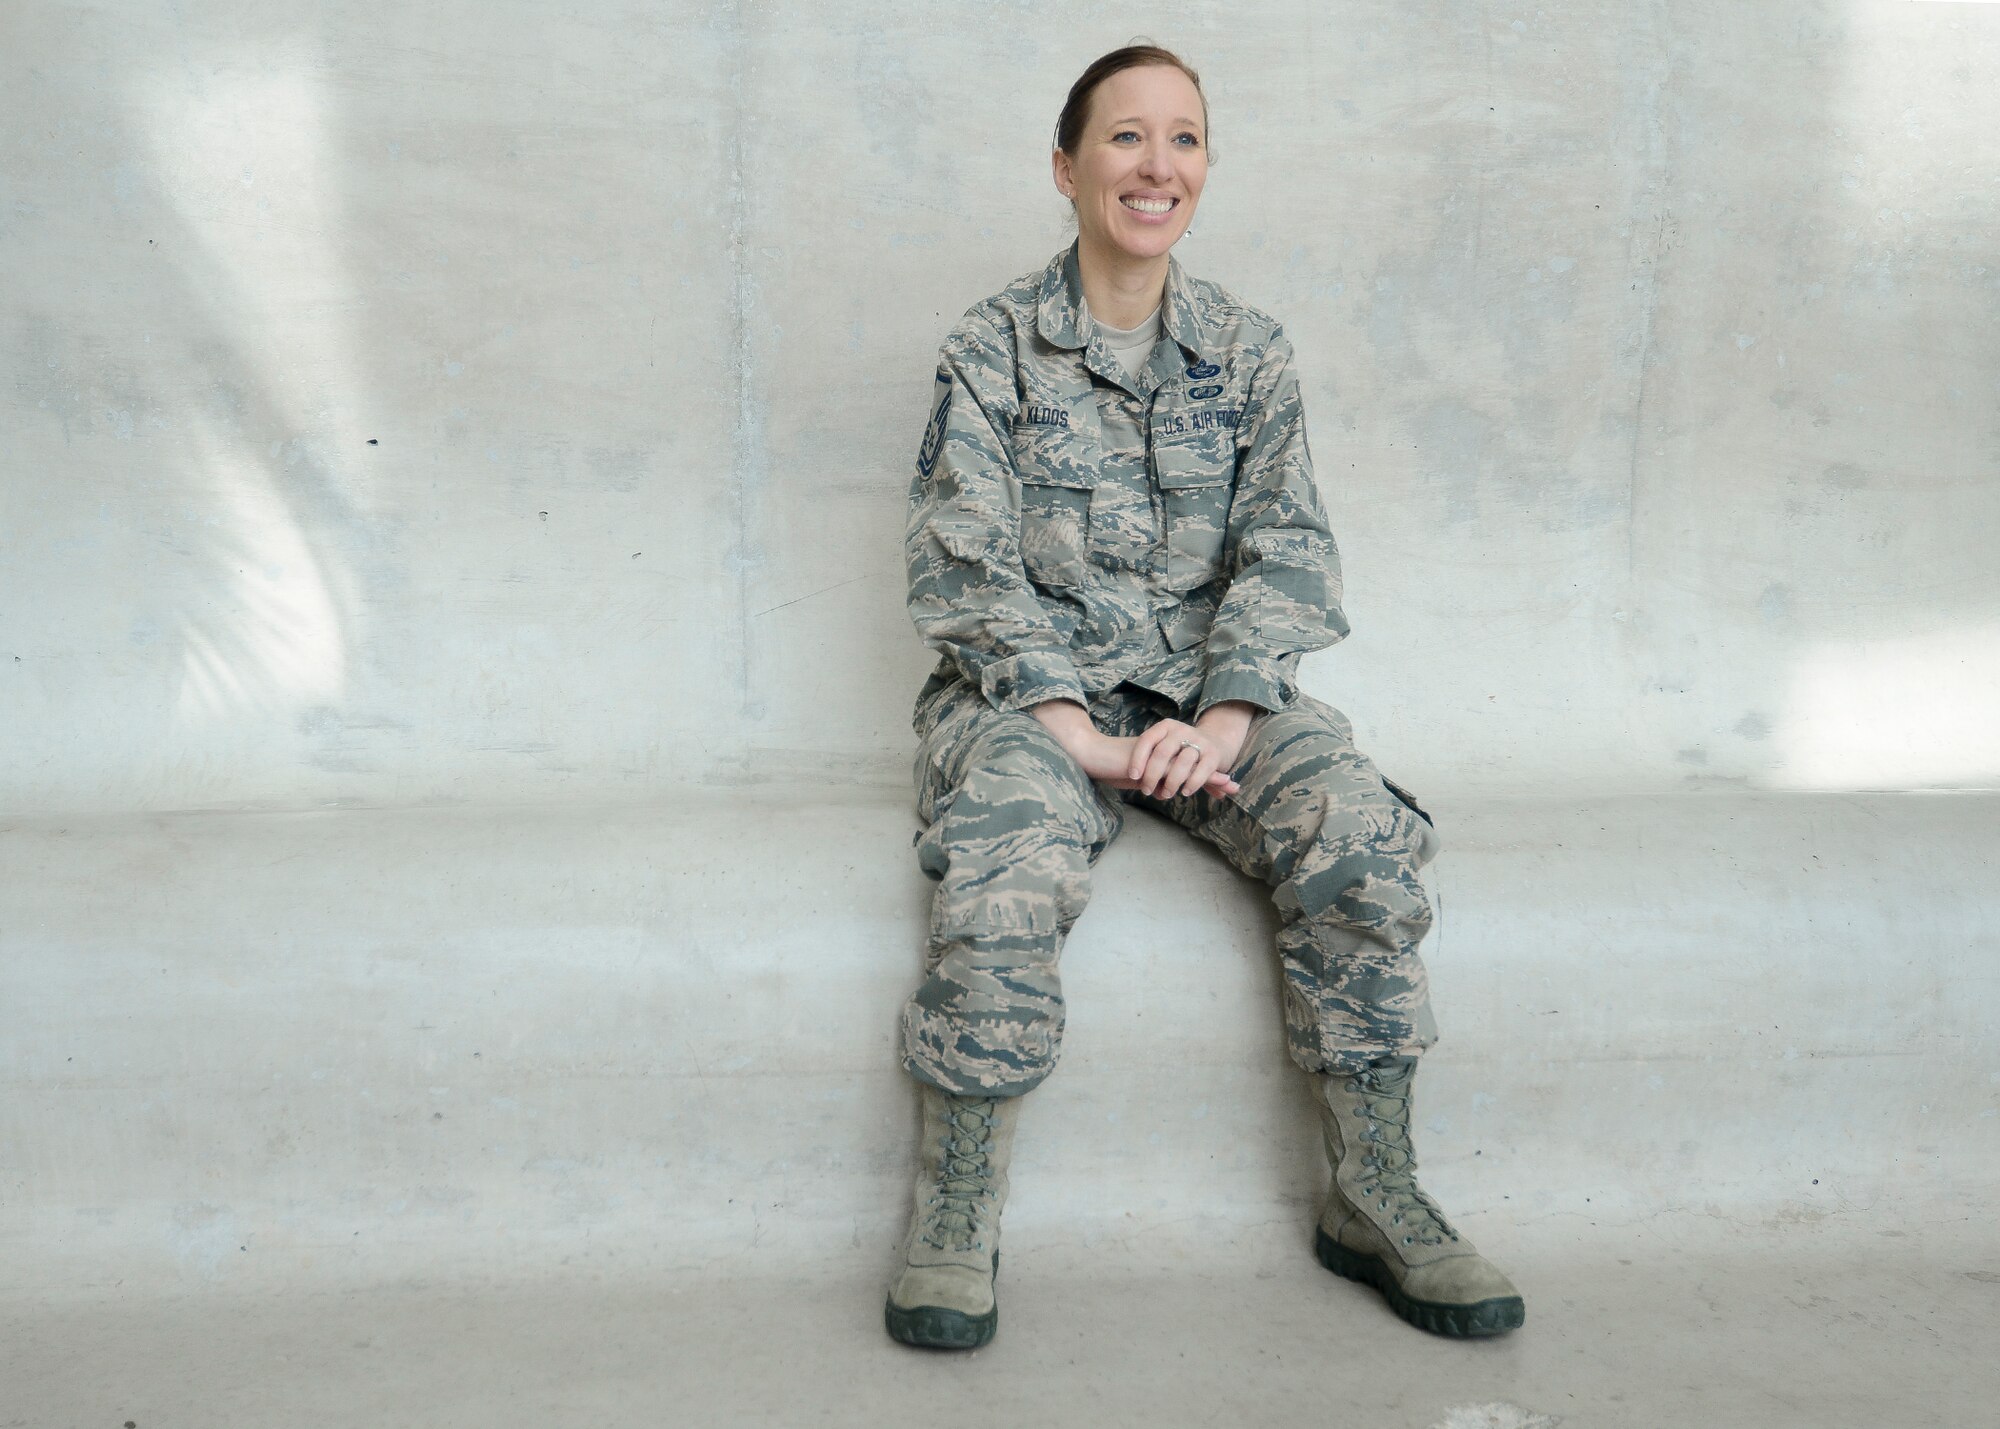 Master Sergeant Dawn C. Kloos was selected as the Air National Guard’s 2018 Outstanding First Sergeant of the Year.